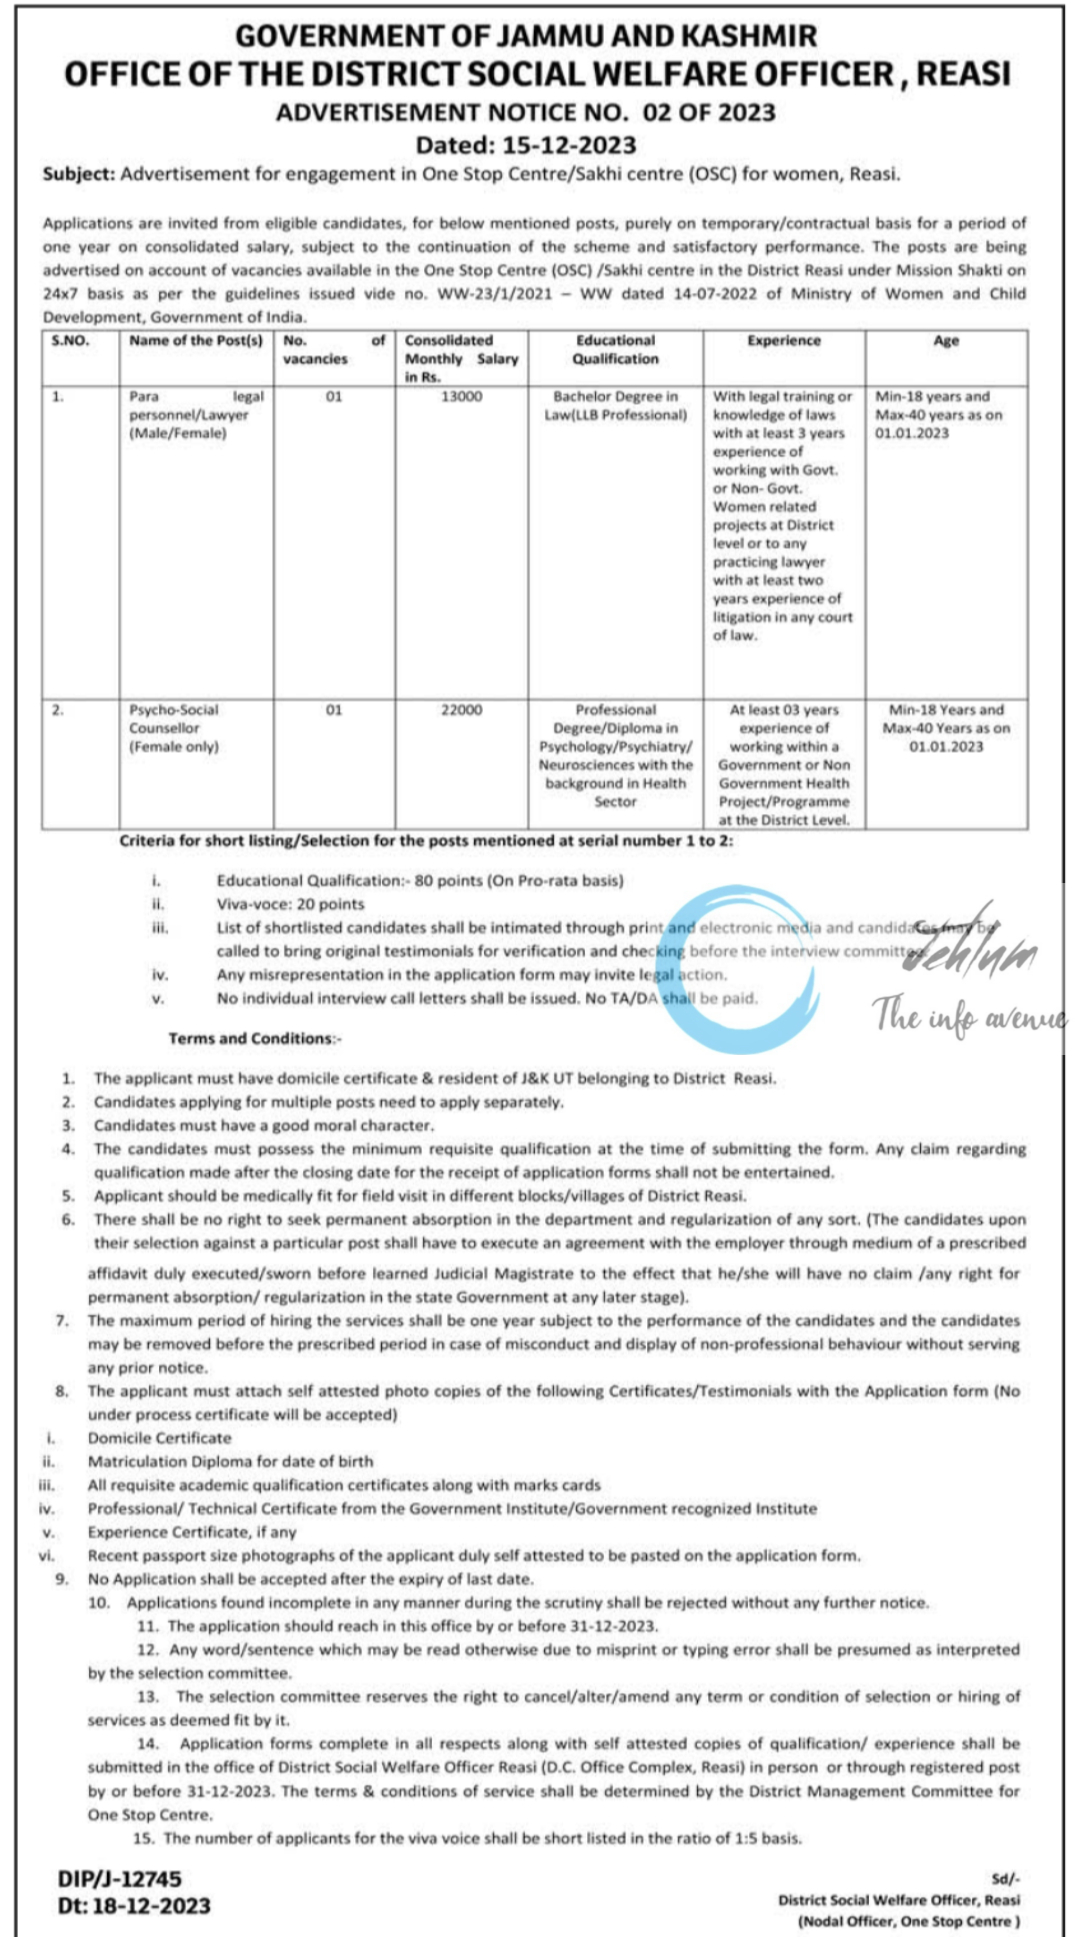 DISTRICT SOCIAL WELFARE OFFICE REASI ADVERTISEMENT NOTICE NO 02 OF 2023